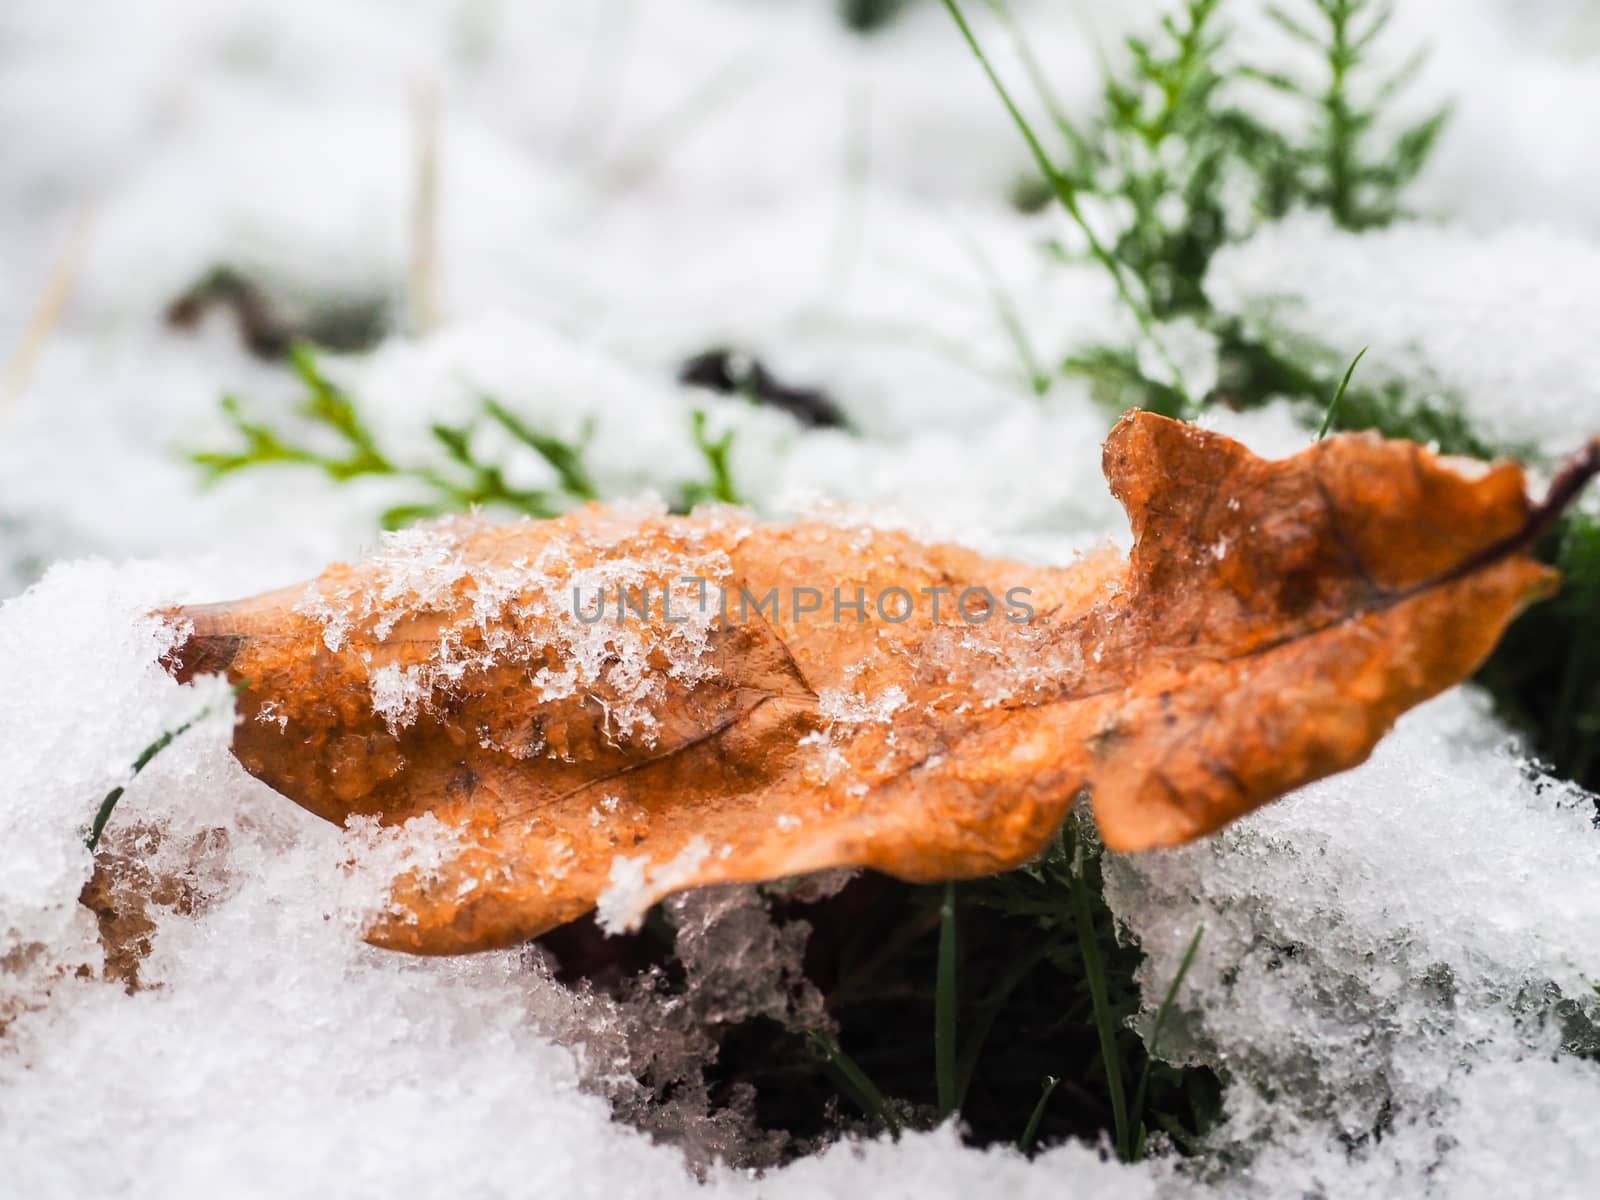 Brown oak tree leaf with a fresh layer of snow